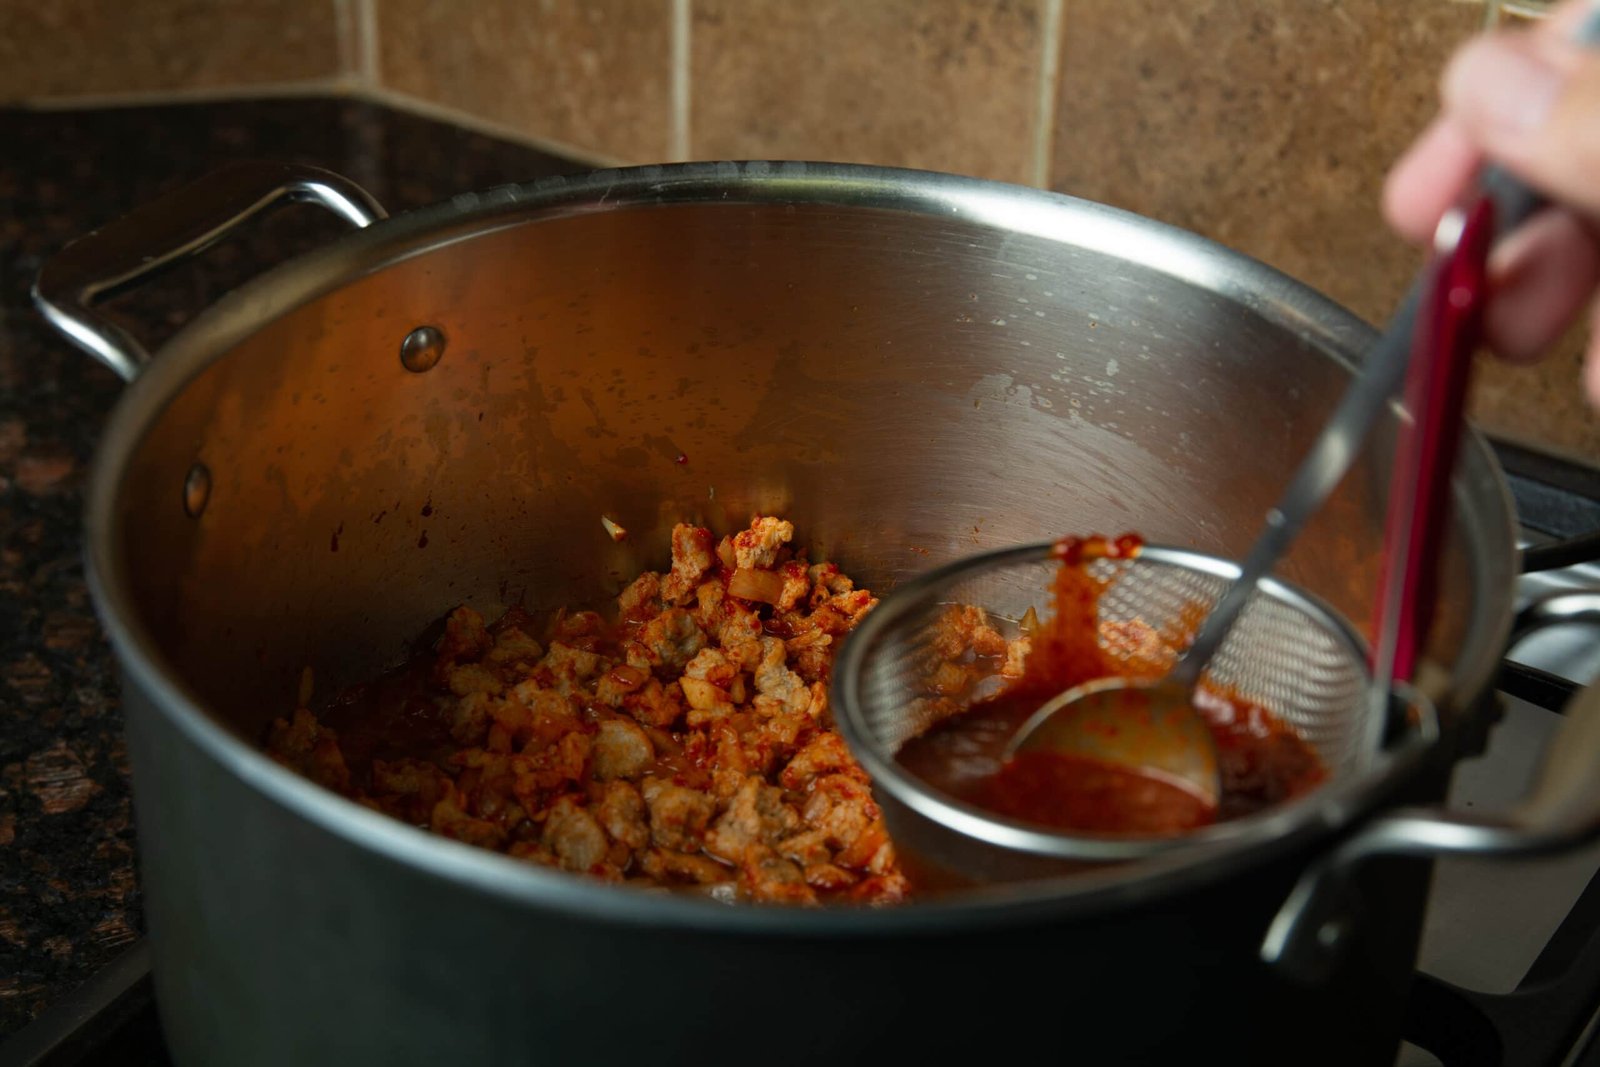 A strainer over the pot of chili with a spoon straining out bits of chili seeds and skin.